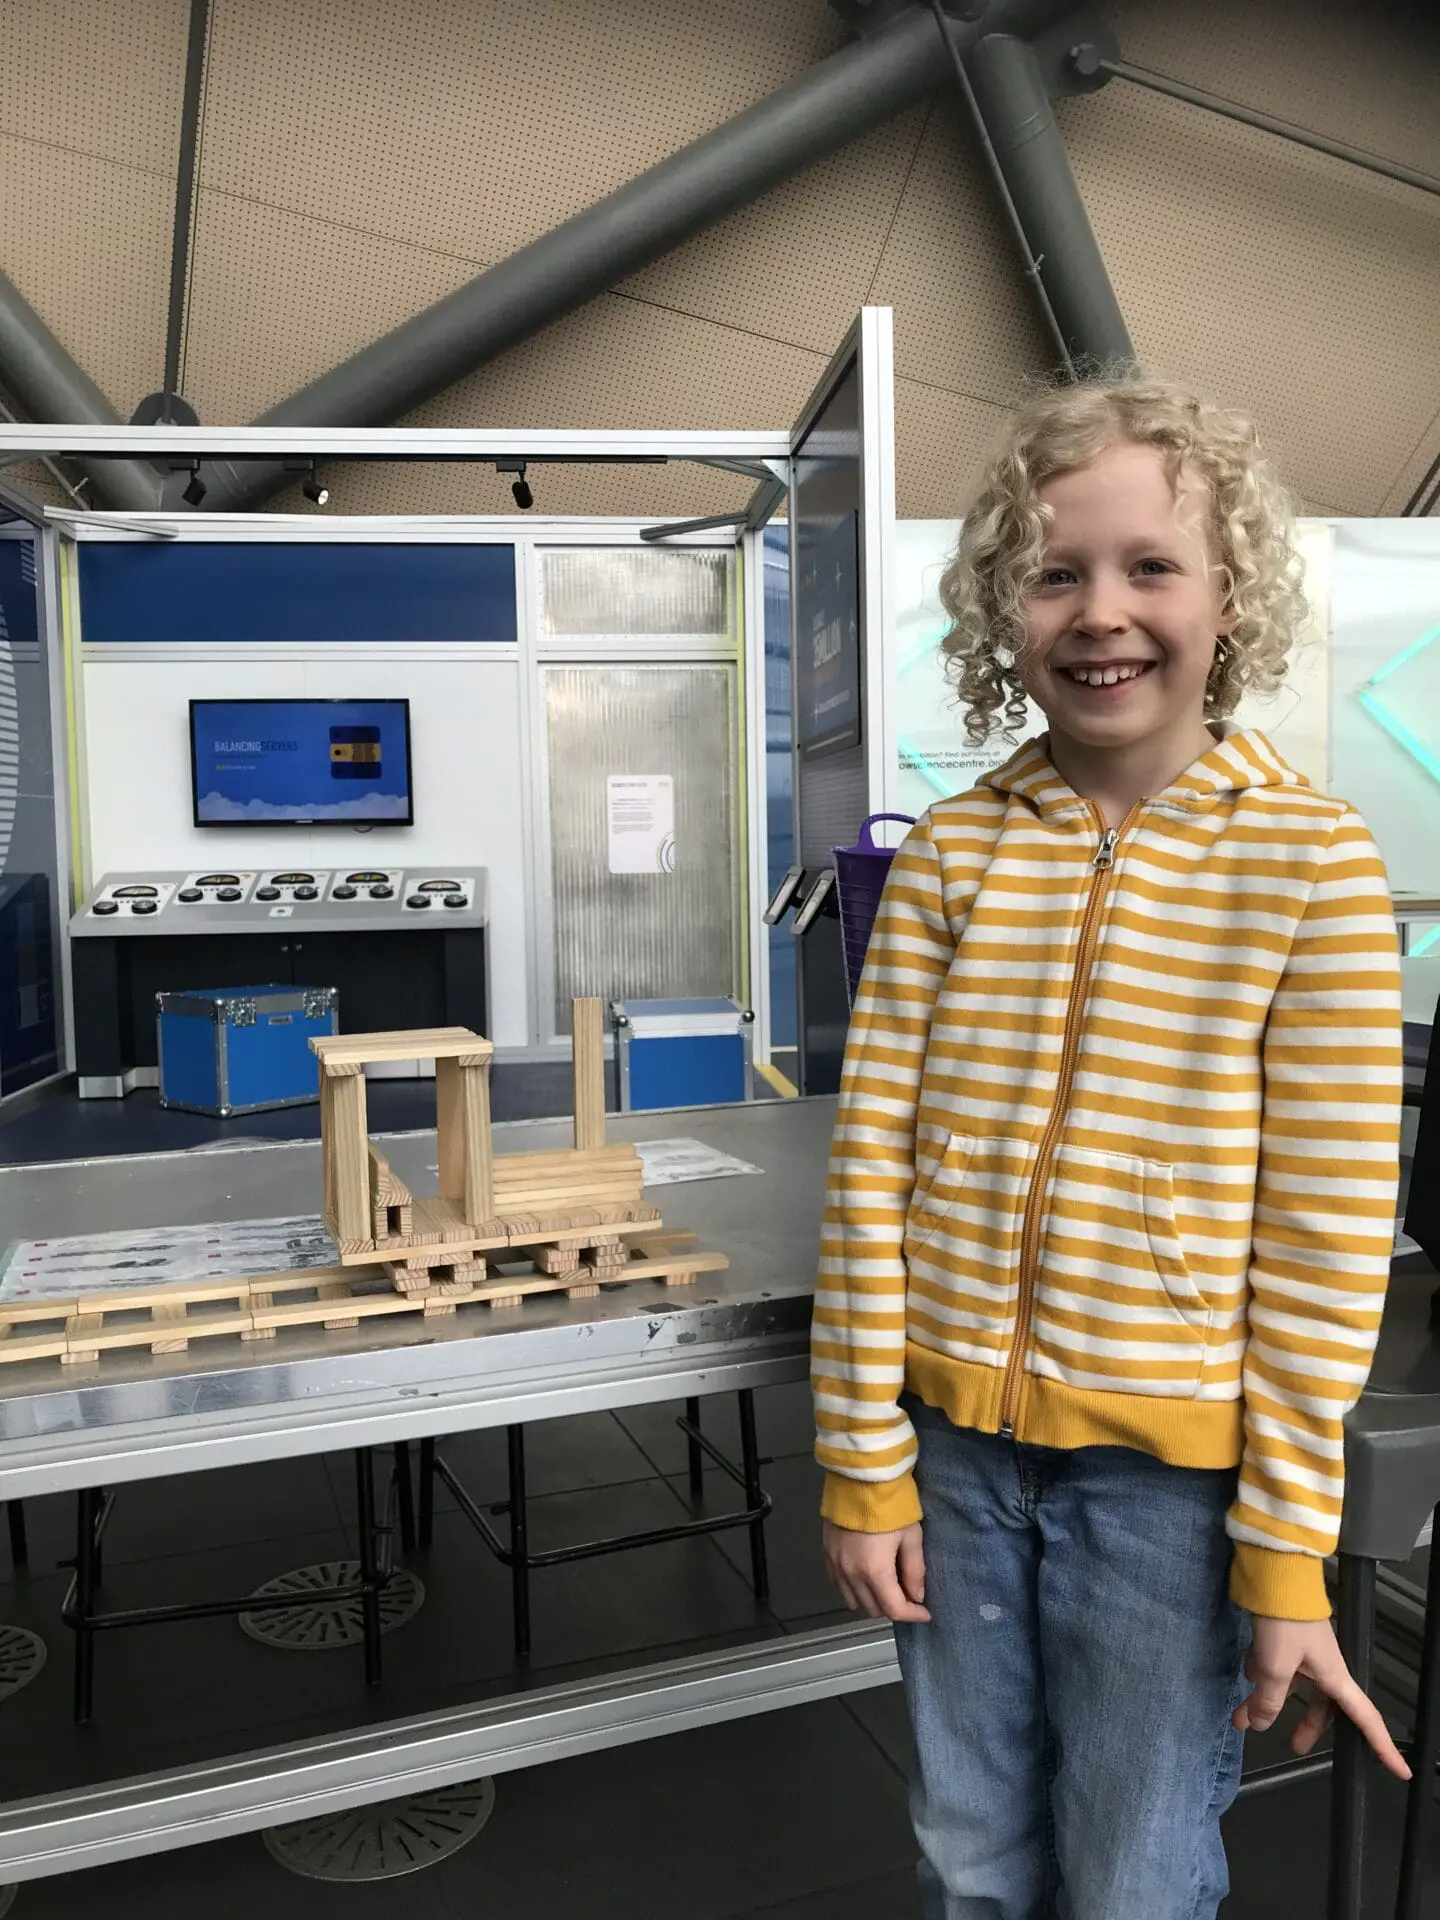 Child building train with blocks at science centre